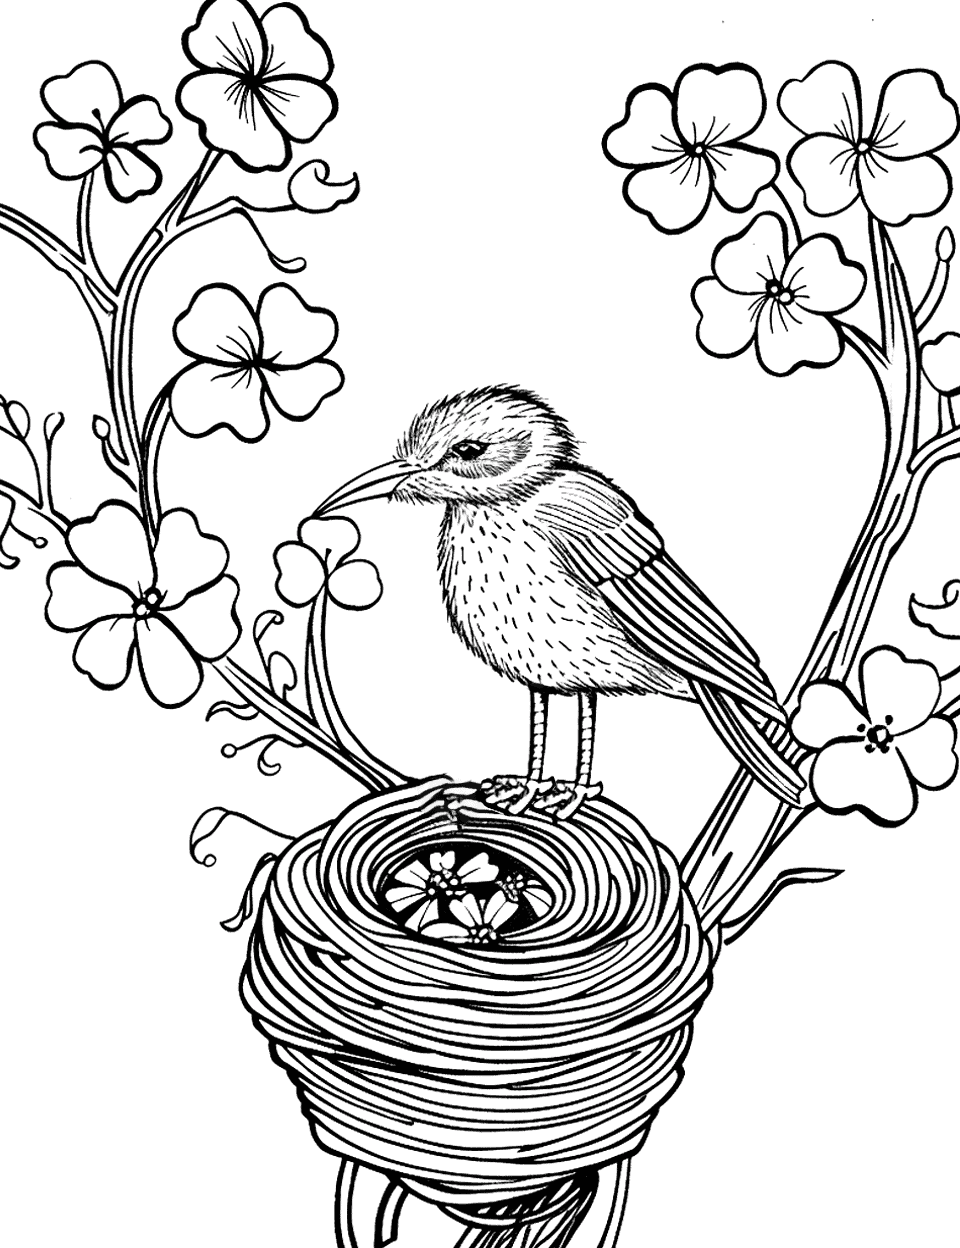 Bird Building a Nest with Shamrocks Shamrock Coloring Page - A bird weaving shamrocks into its nest in a tree.